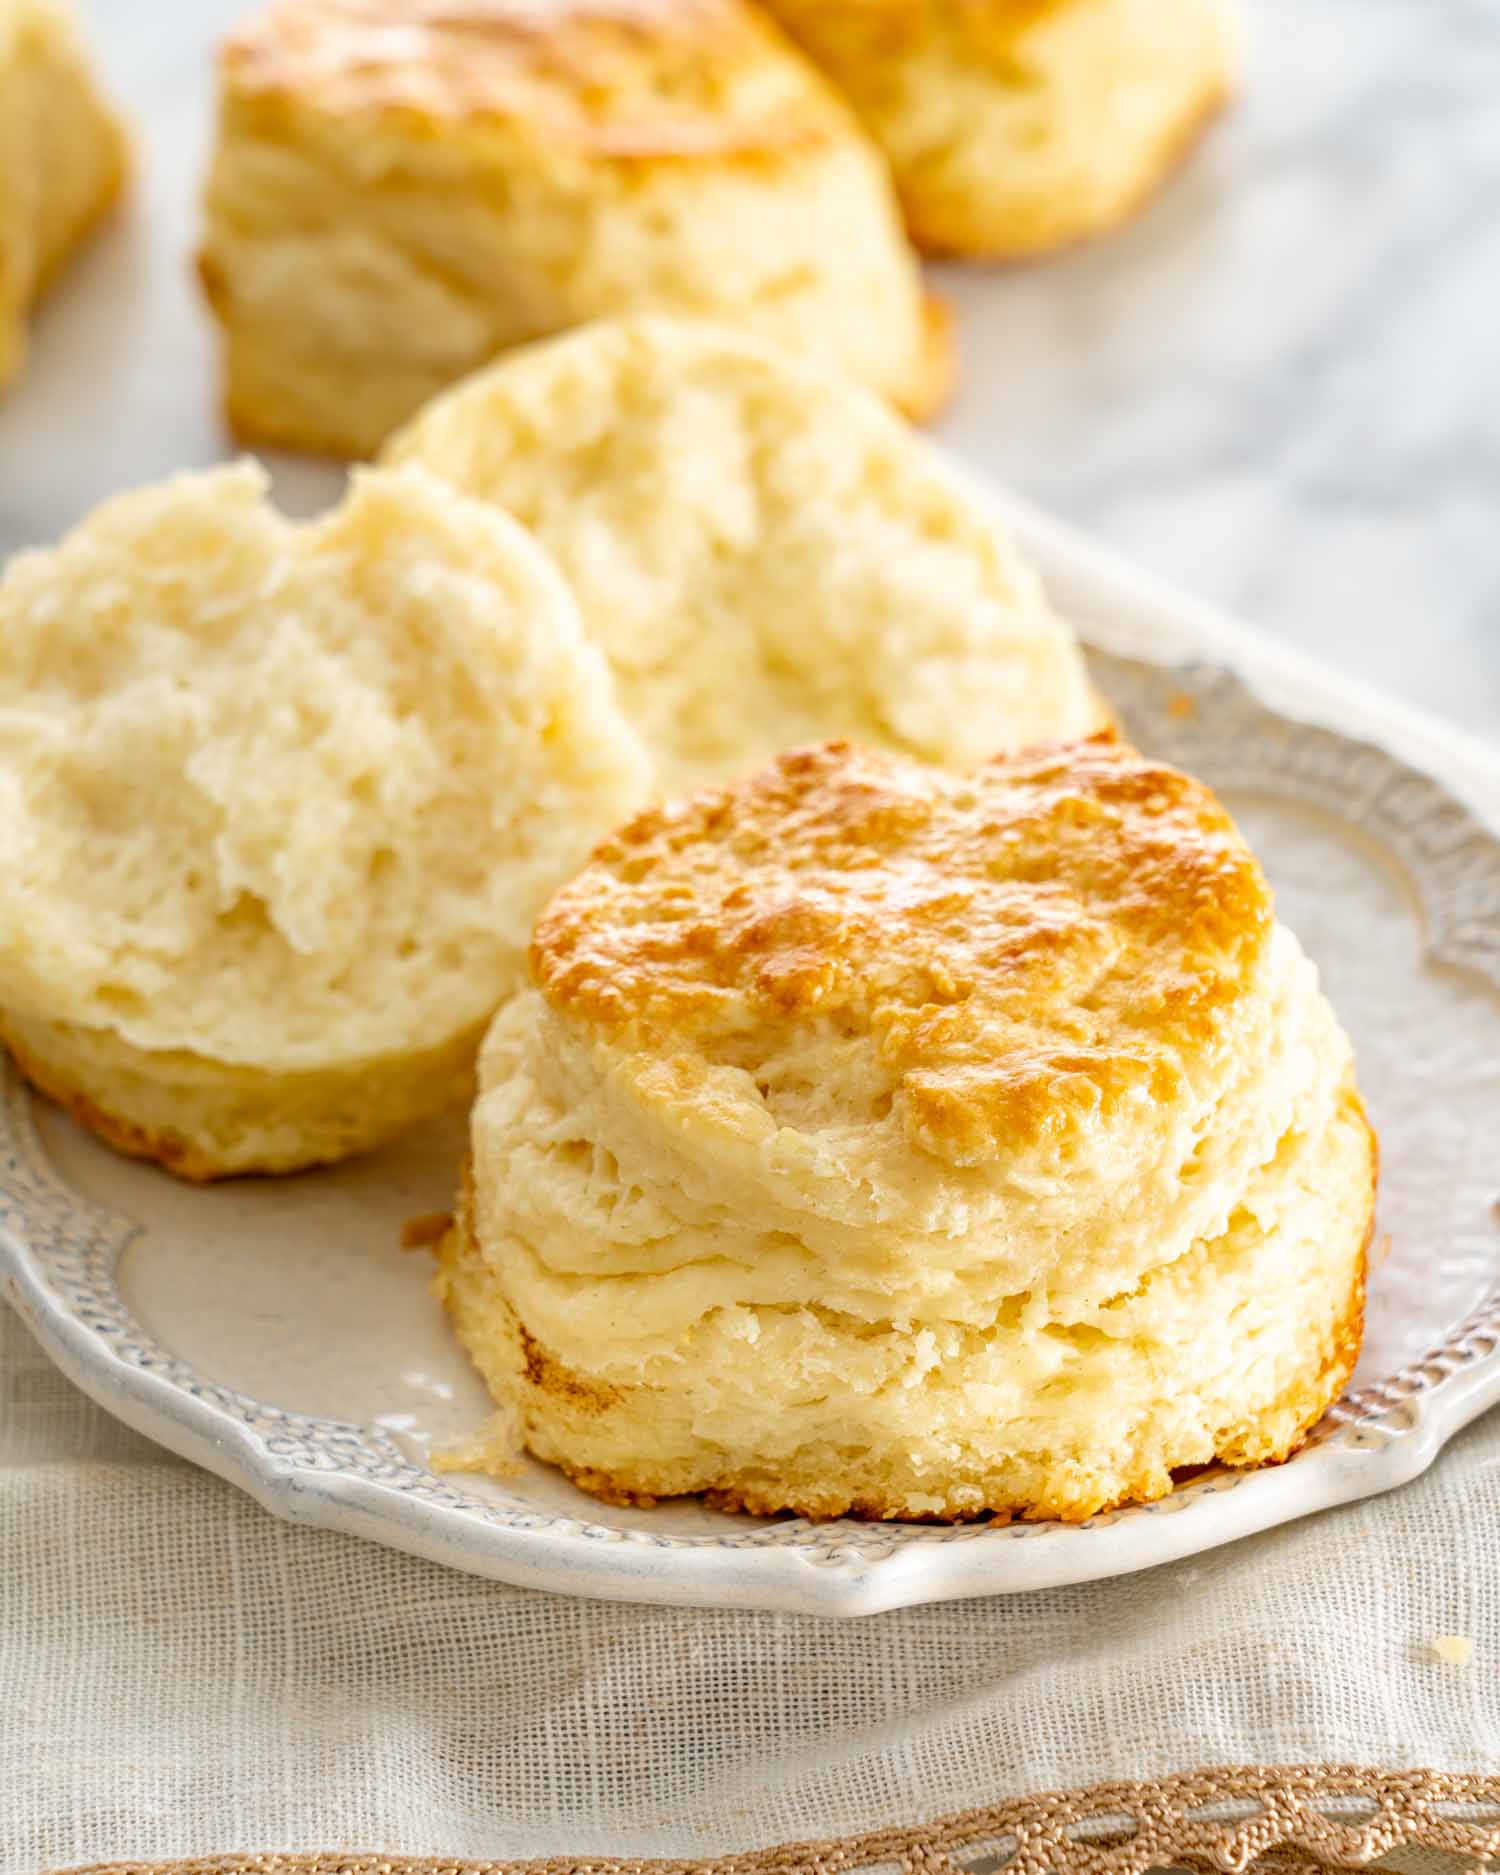 a couple buttermilk biscuits on a plate.